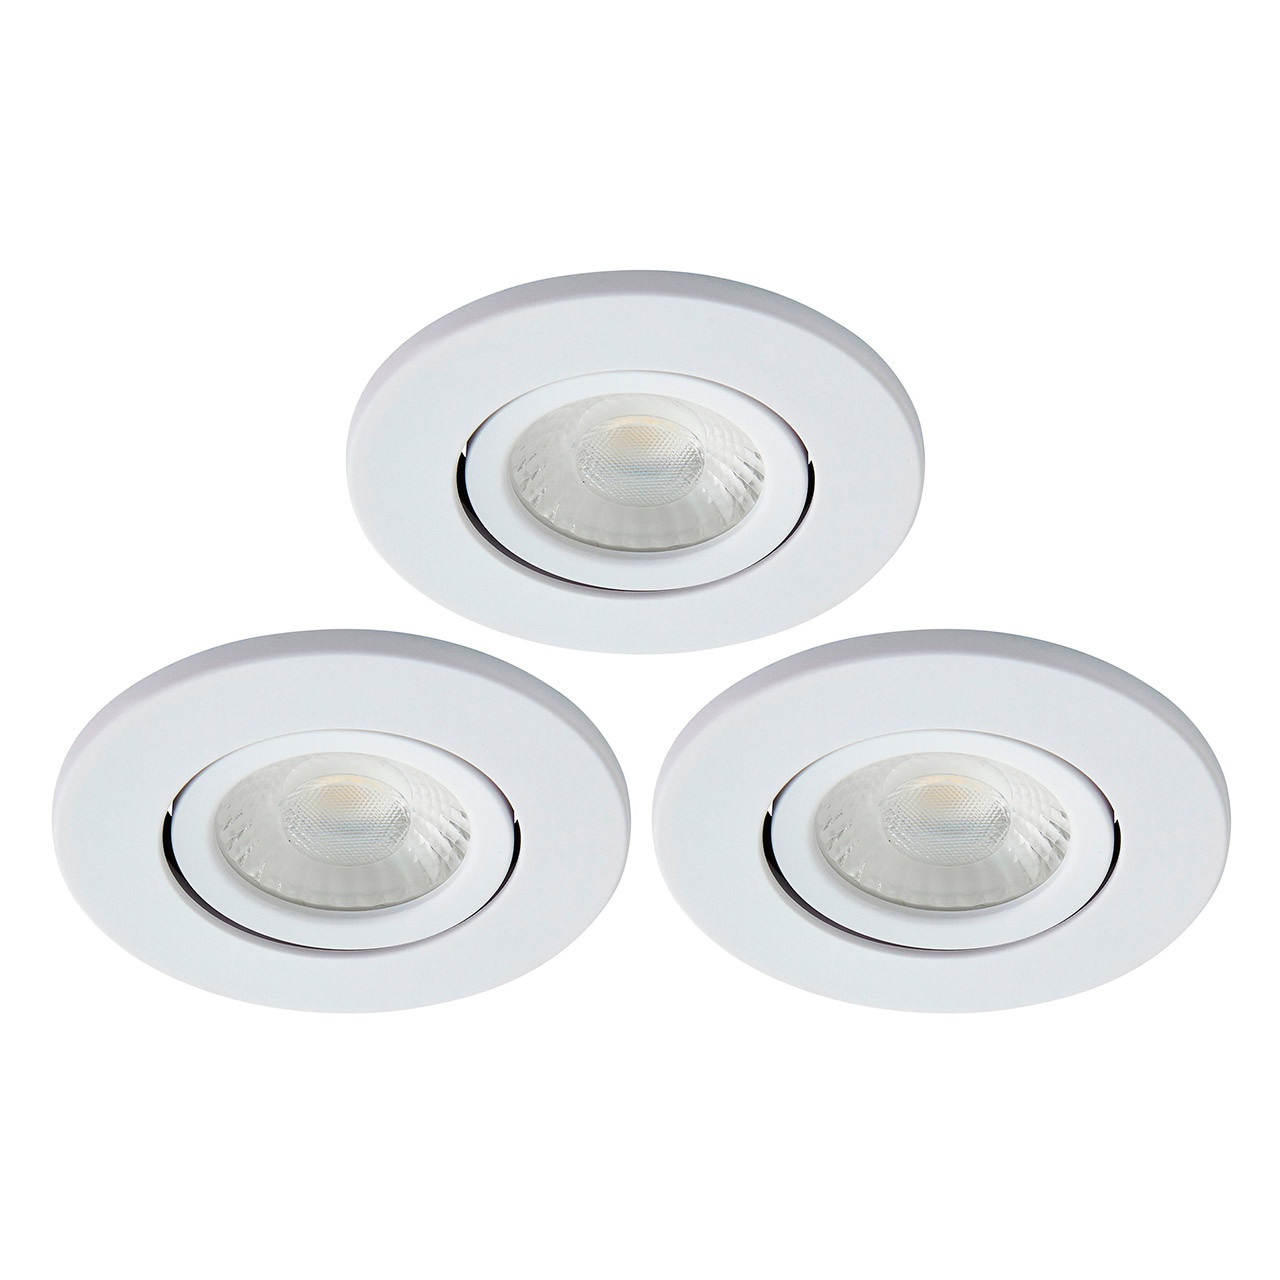 Photos - Chandelier / Lamp SPA Como LED Tiltable Fire Rated Downlight 5W Dimmable 3-Pack Cool White M 